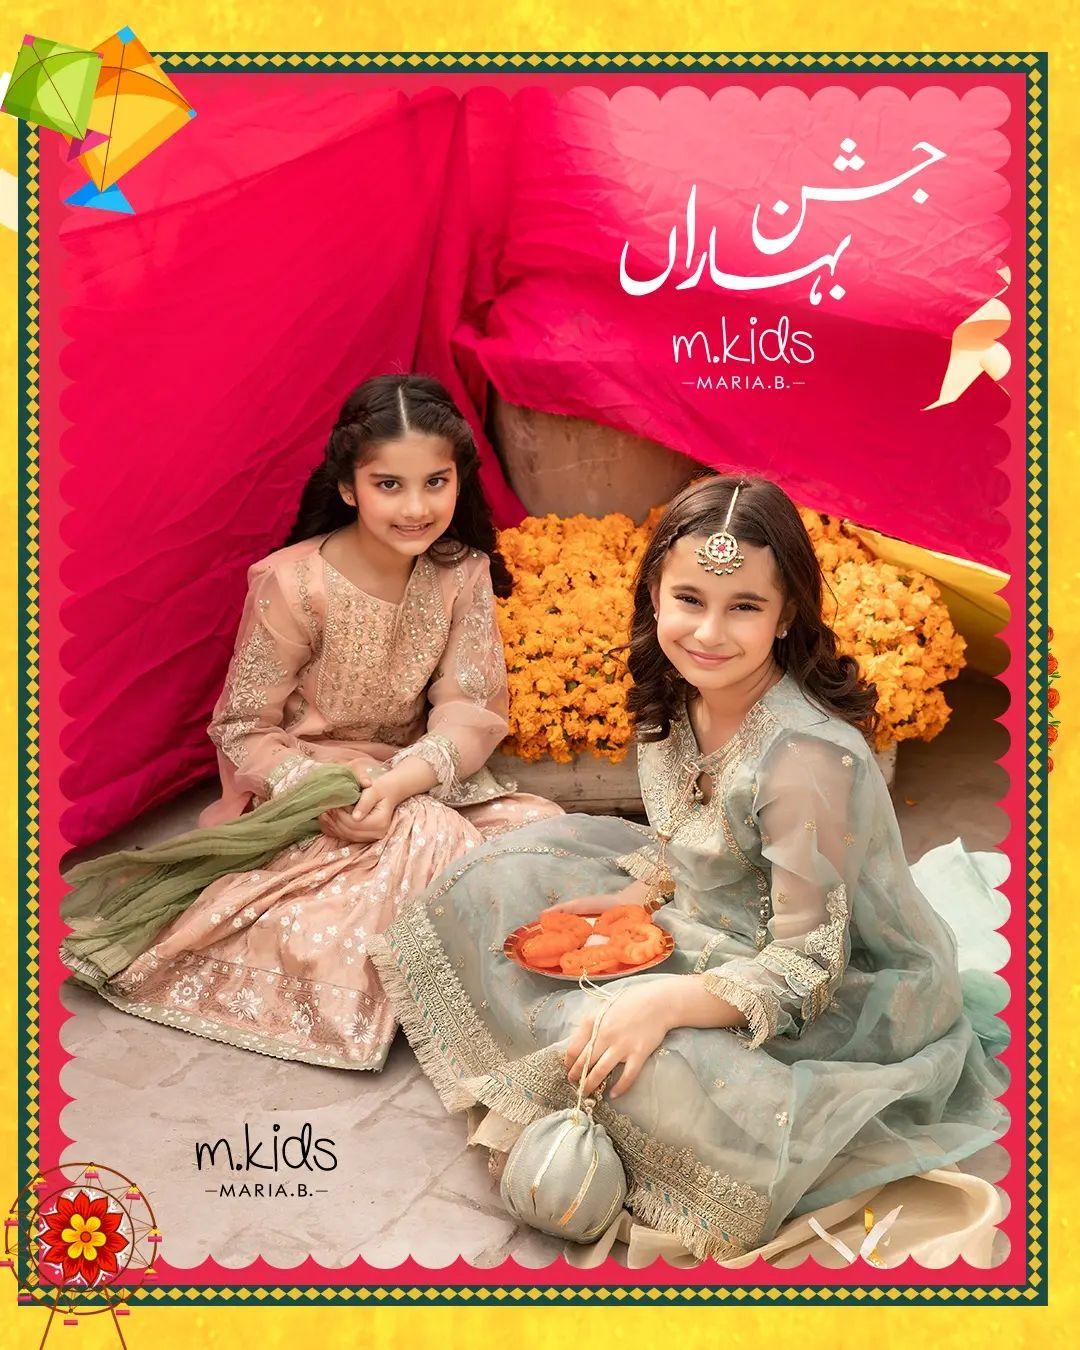 Bursting with beautiful shades of pastels, the new Maria.B. Kids collection promises carefree sun-drenched days ahead with Jashn-e-Baharan Ready-To-Wear Collection’22 !!

Pink Product Code: MKD-EF22-23
Blue Product Code: MKD-EF22-20

Available Now In-Stores &amp; Online at https://www.mariab.pk/kids/kids.html

#MariaB #Mkids #ReadyToWear #MKidsSS22 #SpringSummer2022
*Follow our dedicated page for constant updates @mariabkids